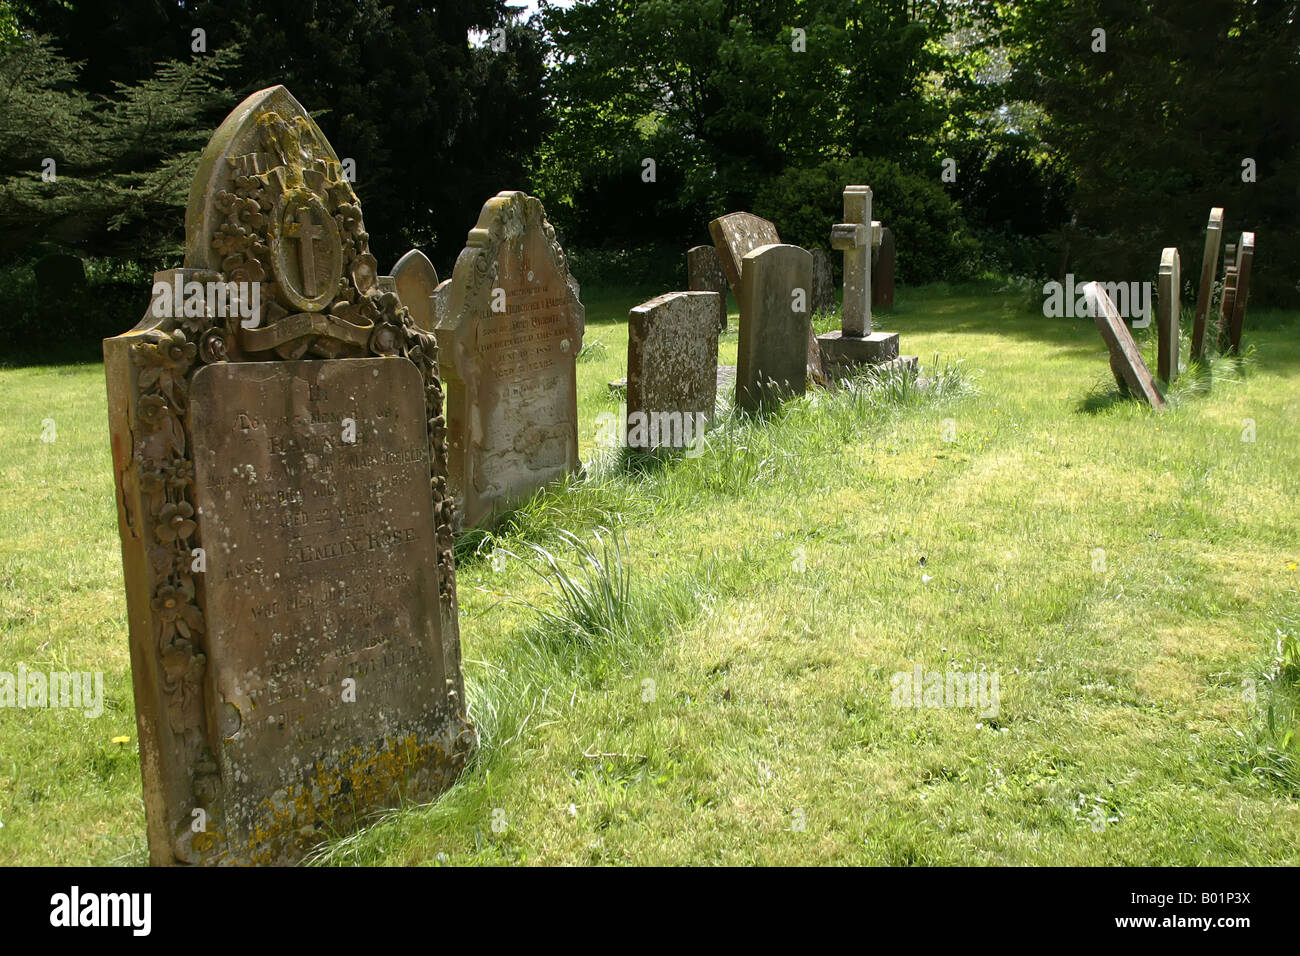 Tombstones in the graveyard of St Michael's Church, Stewkley, Buckinghamshire, UK Stock Photo